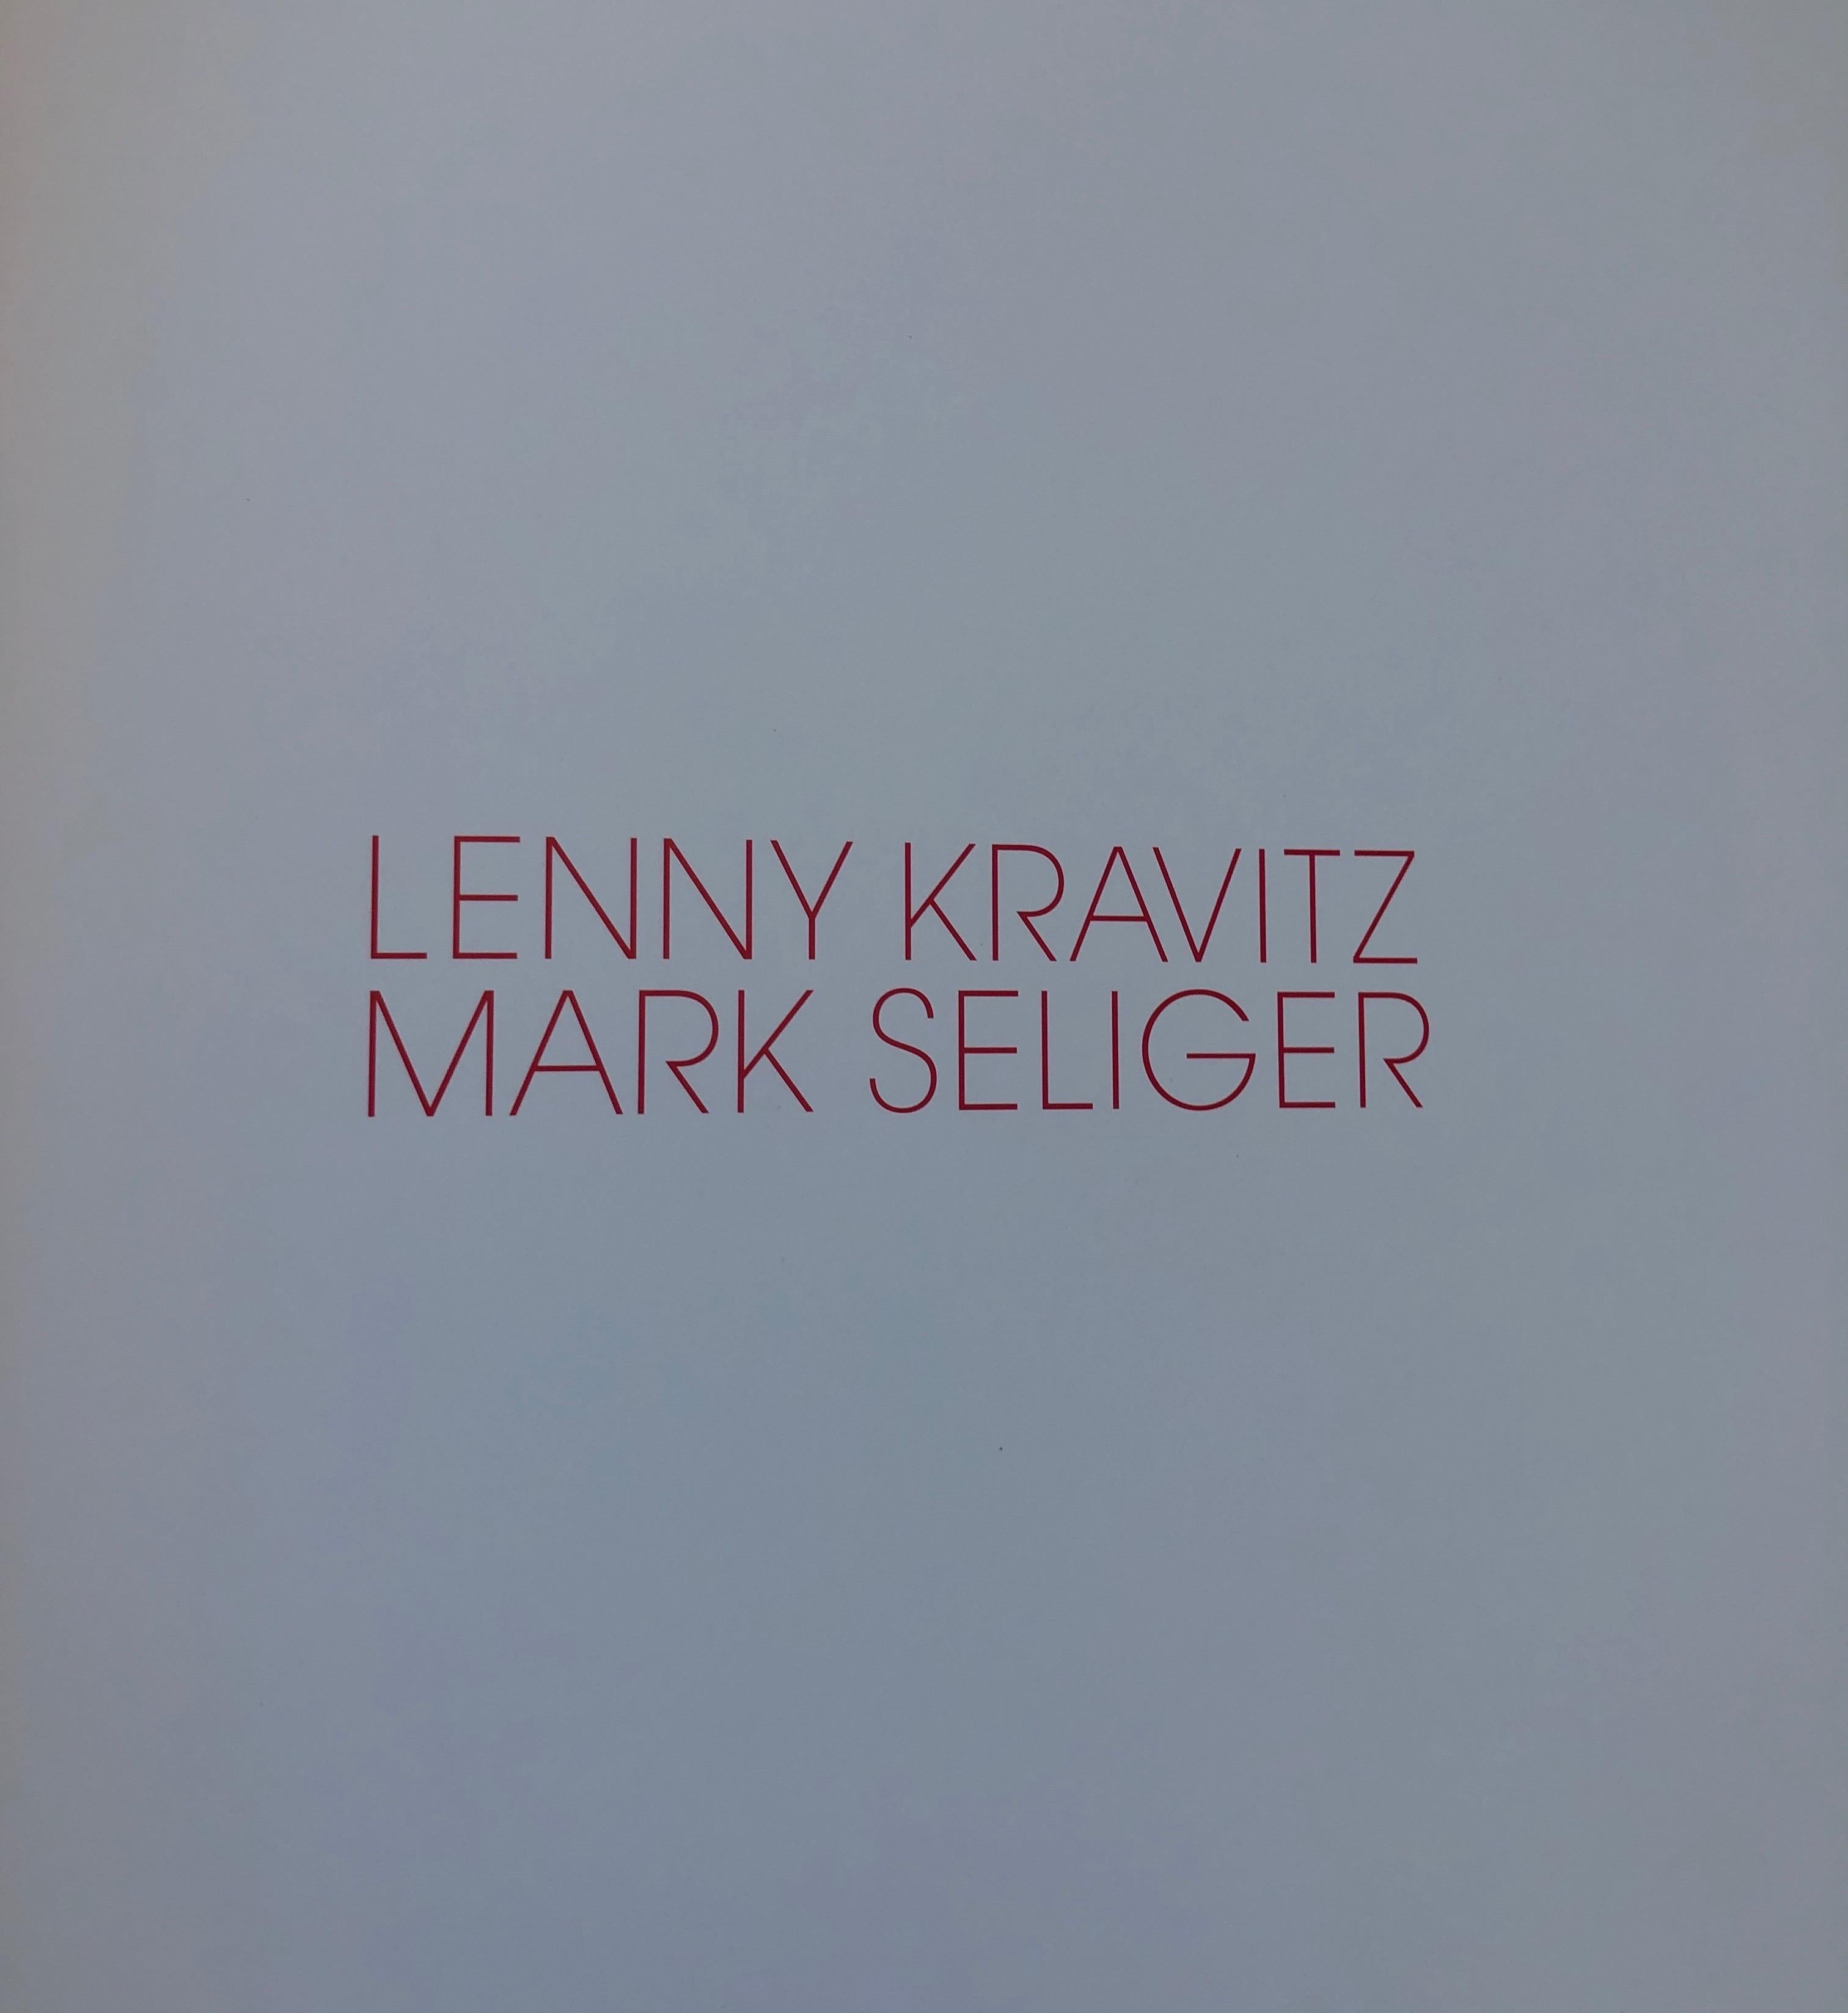 Musician Lenny Kravitz and photographer Mark Seliger, chief photographer for Rolling Stone, have been good friends for many years. With access only close friendship allows, Seliger here captures Kravitz on the road, with his family, performing, in